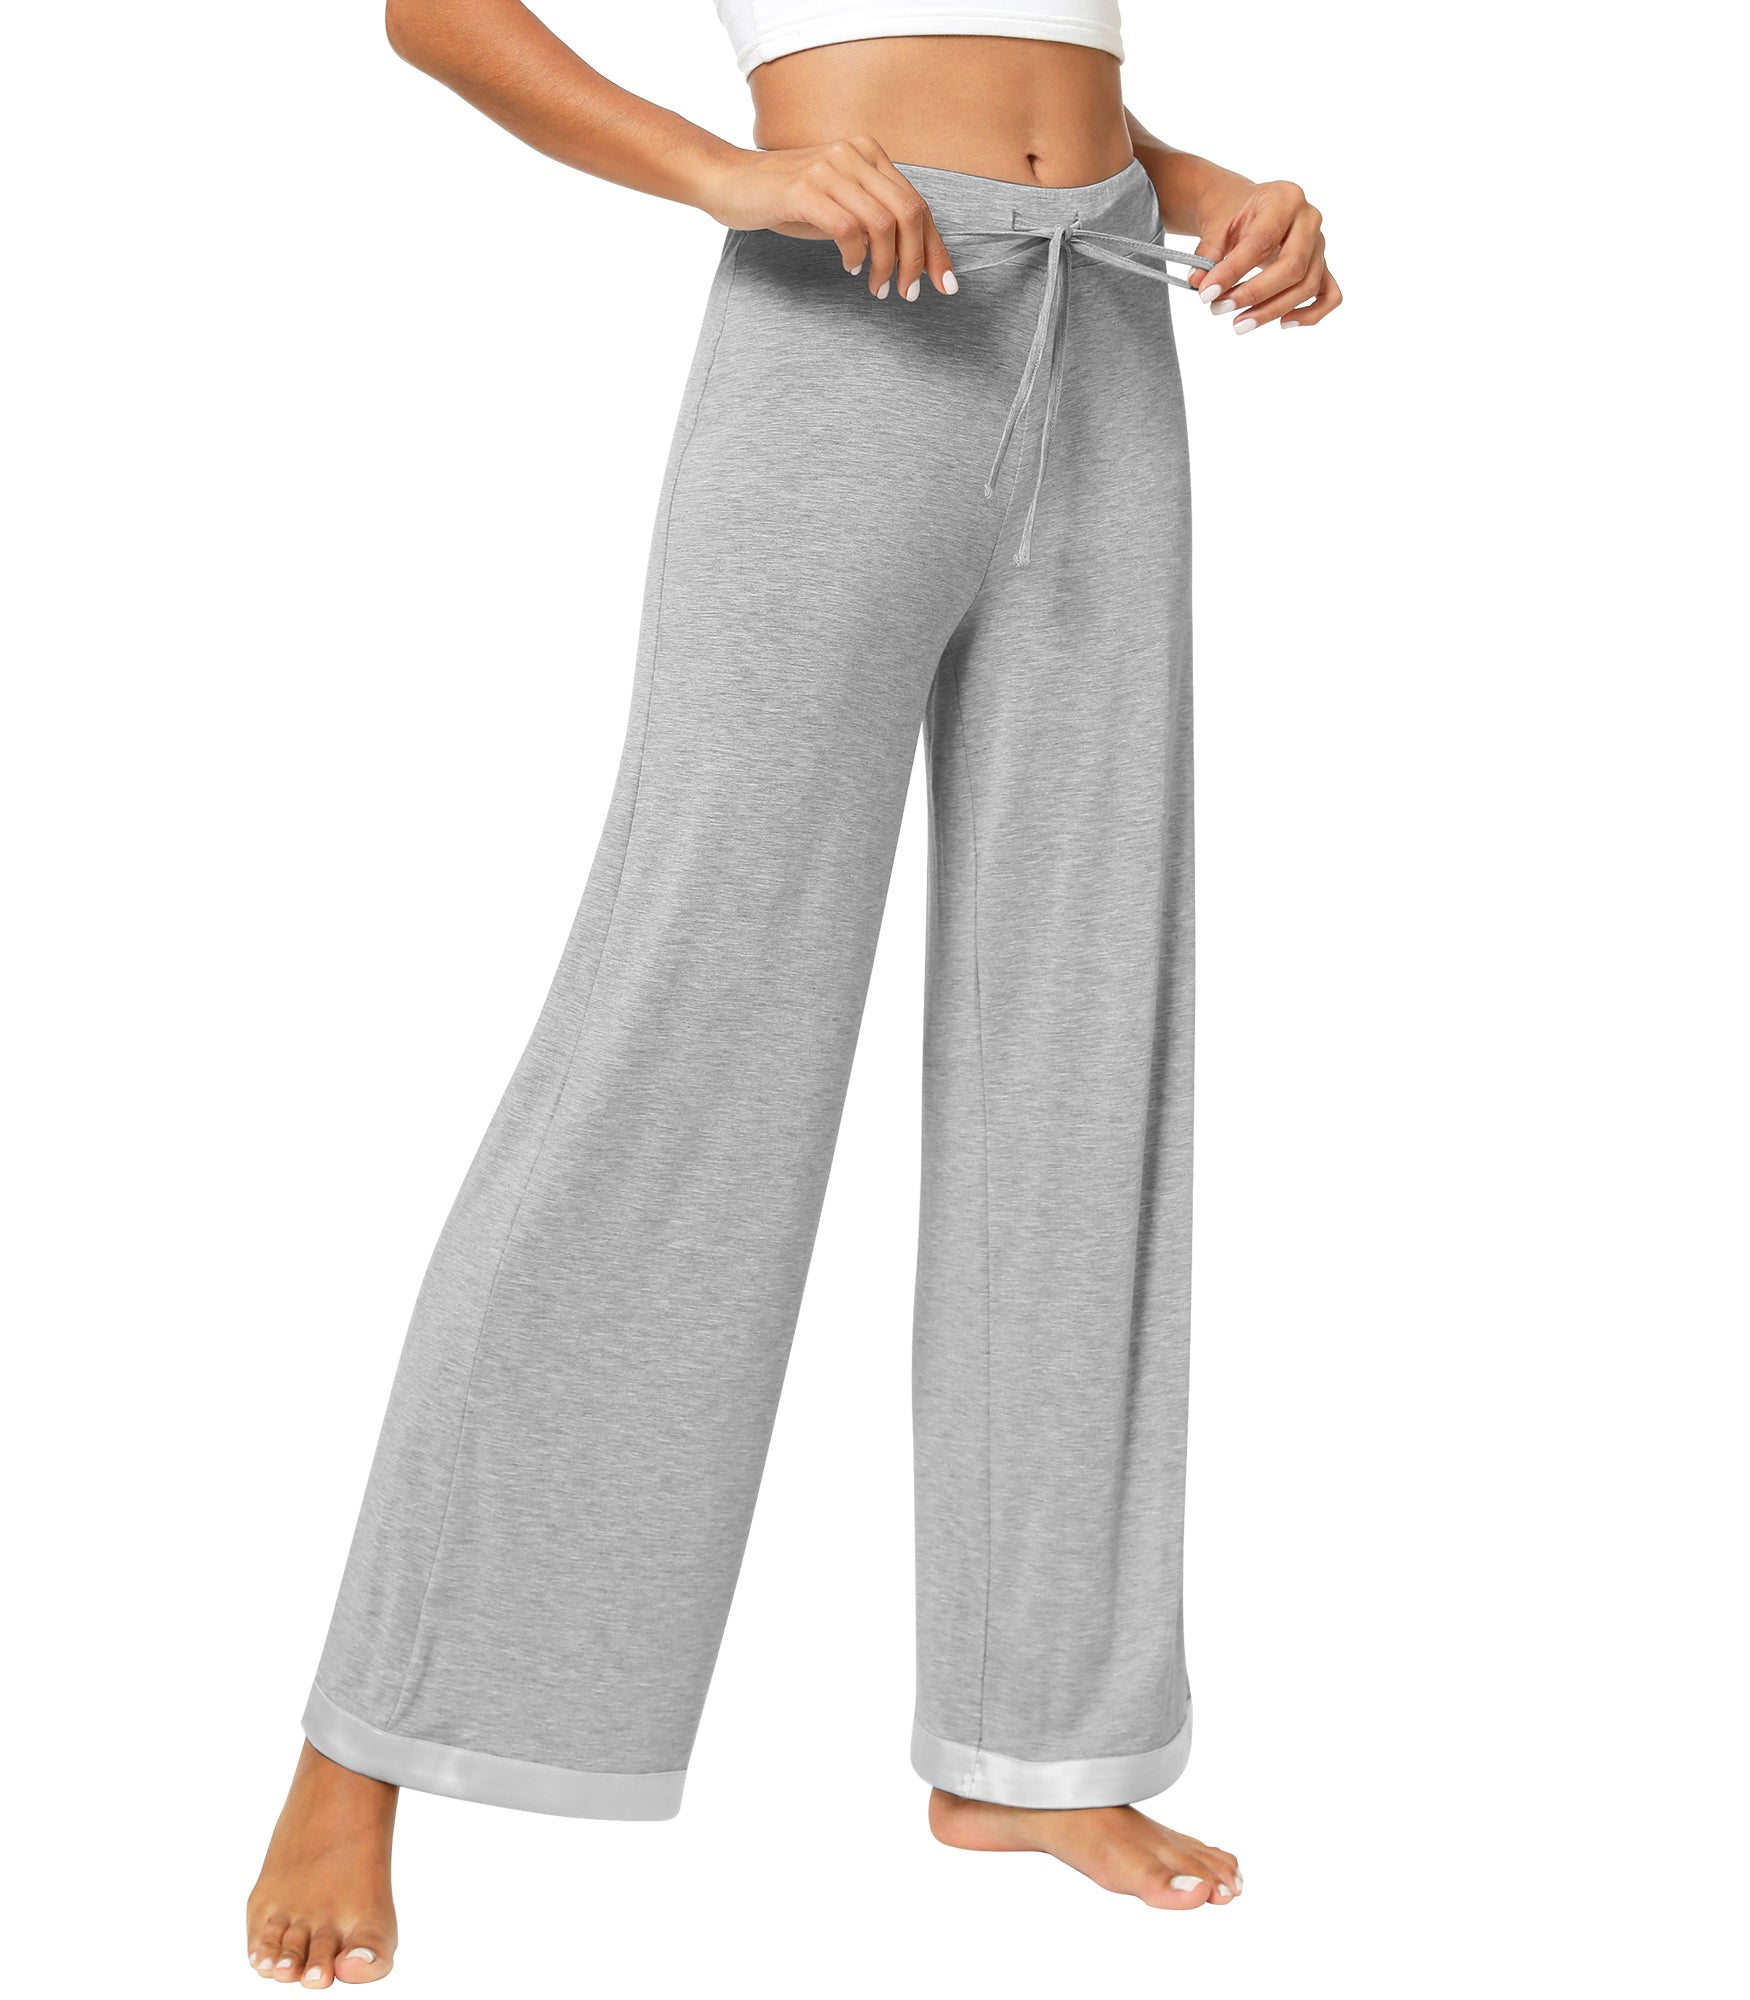  WiWi Viscose from Bamboo Pants for Women Wide Leg Yoga